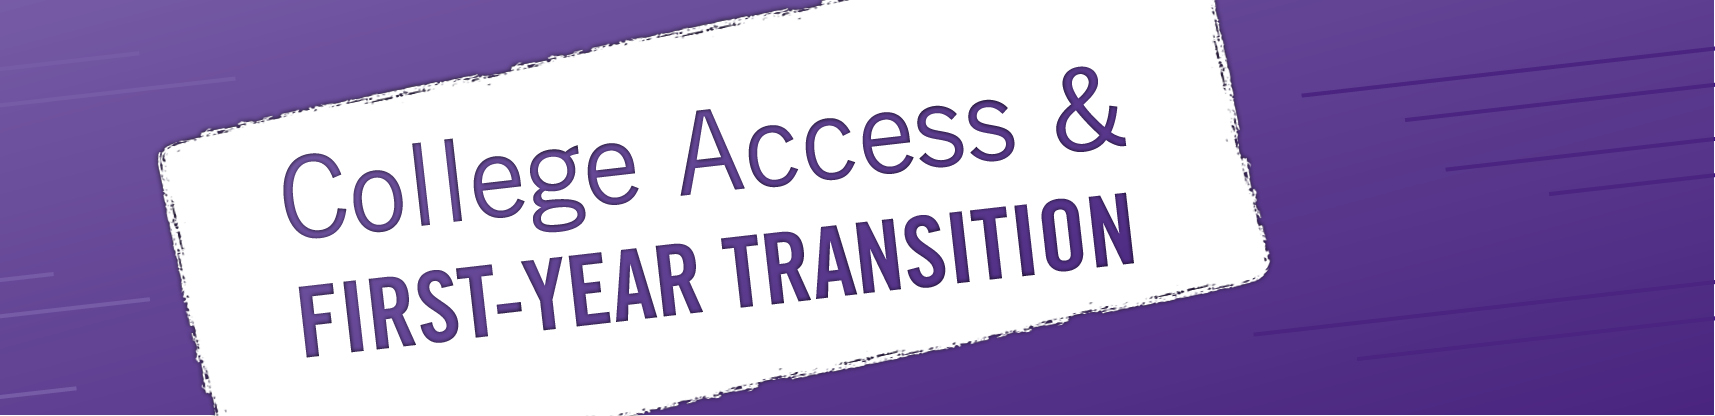 College Access and First-Year Transition